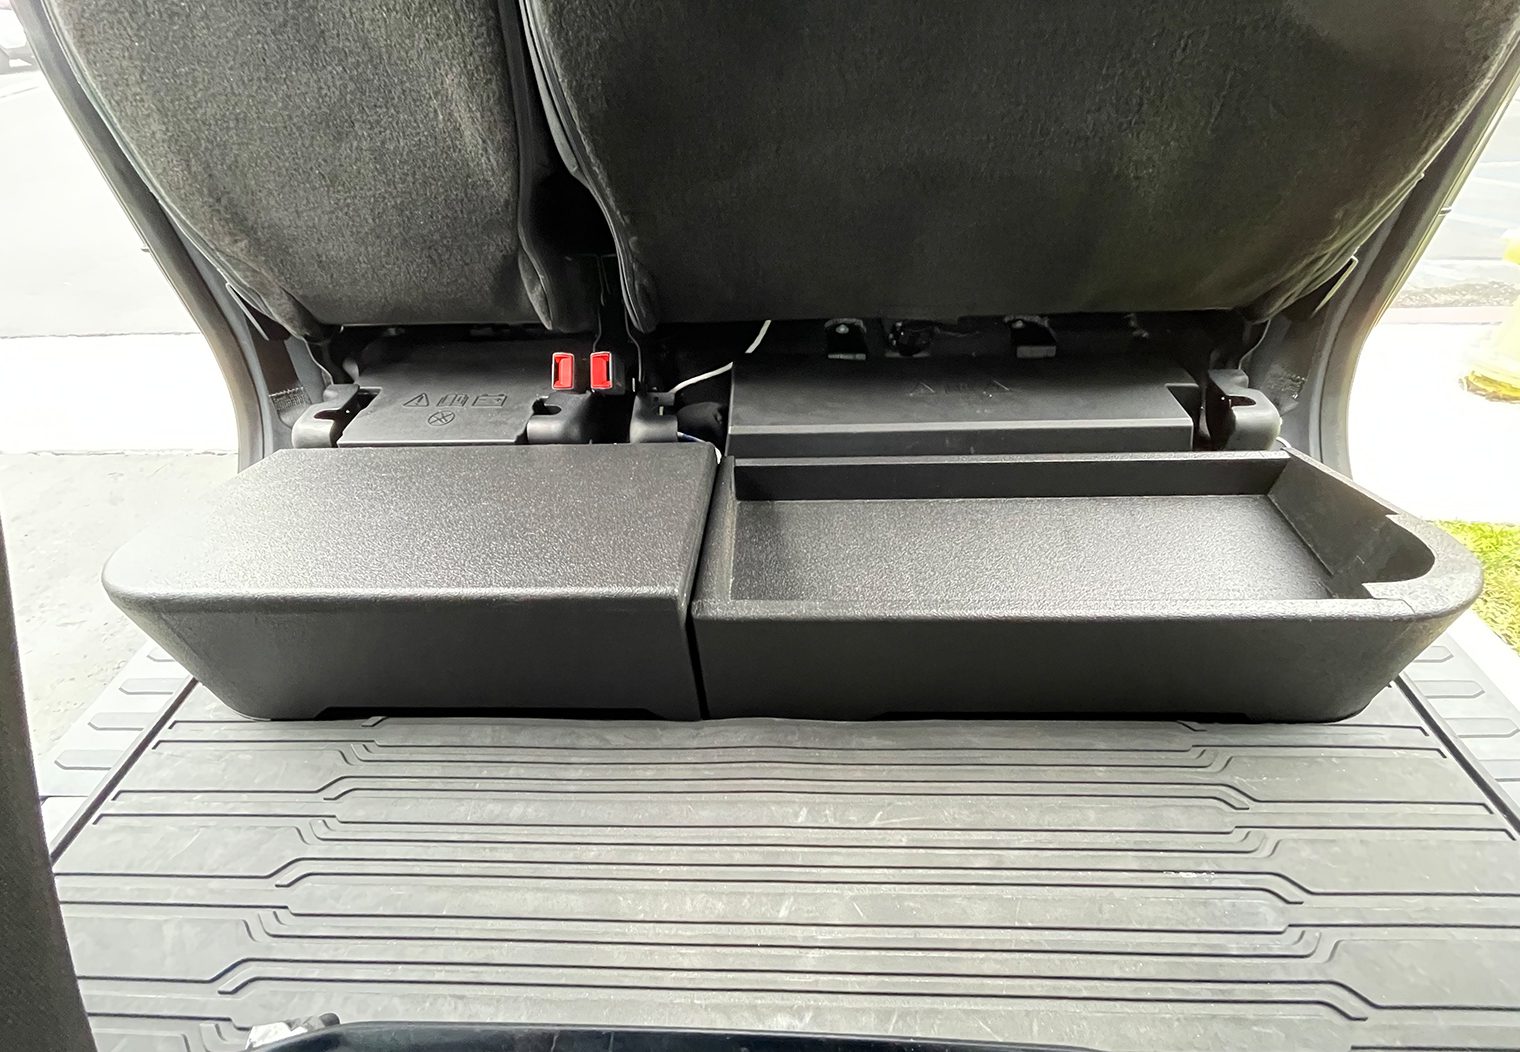 View of the custom enclosure installed with the seats up from the front of the truck